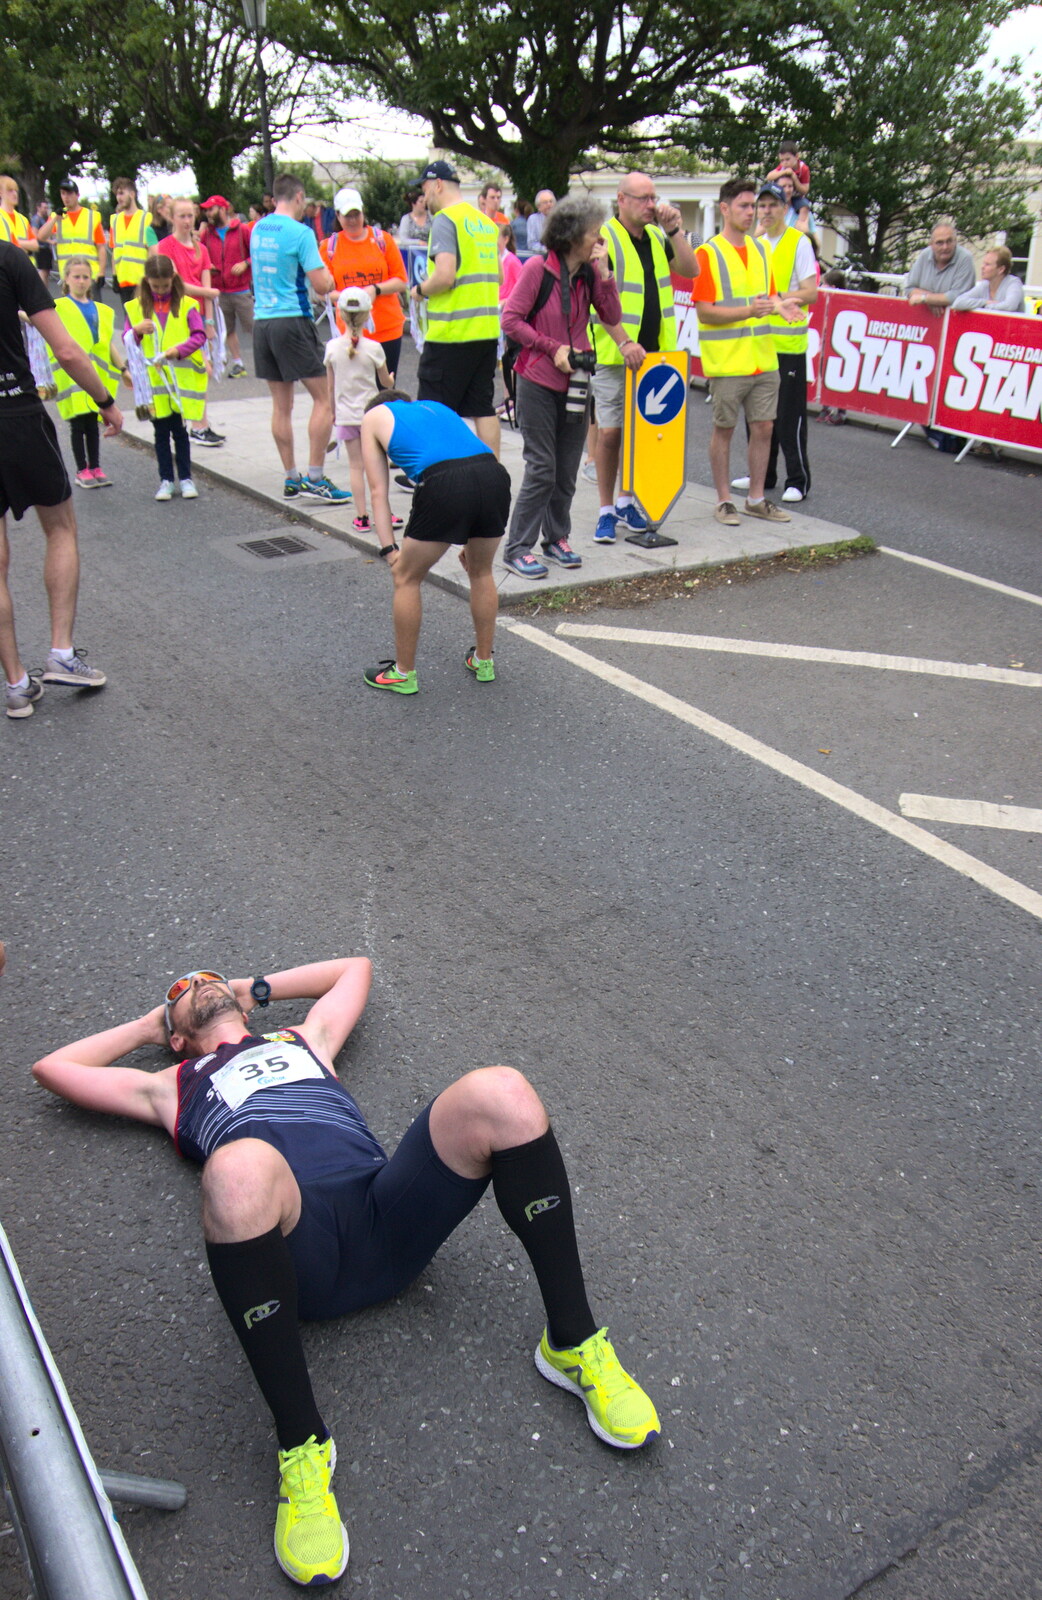 It's all a bit much for some from The Dún Laoghaire 10k Run, County Dublin, Ireland - 6th August 2018